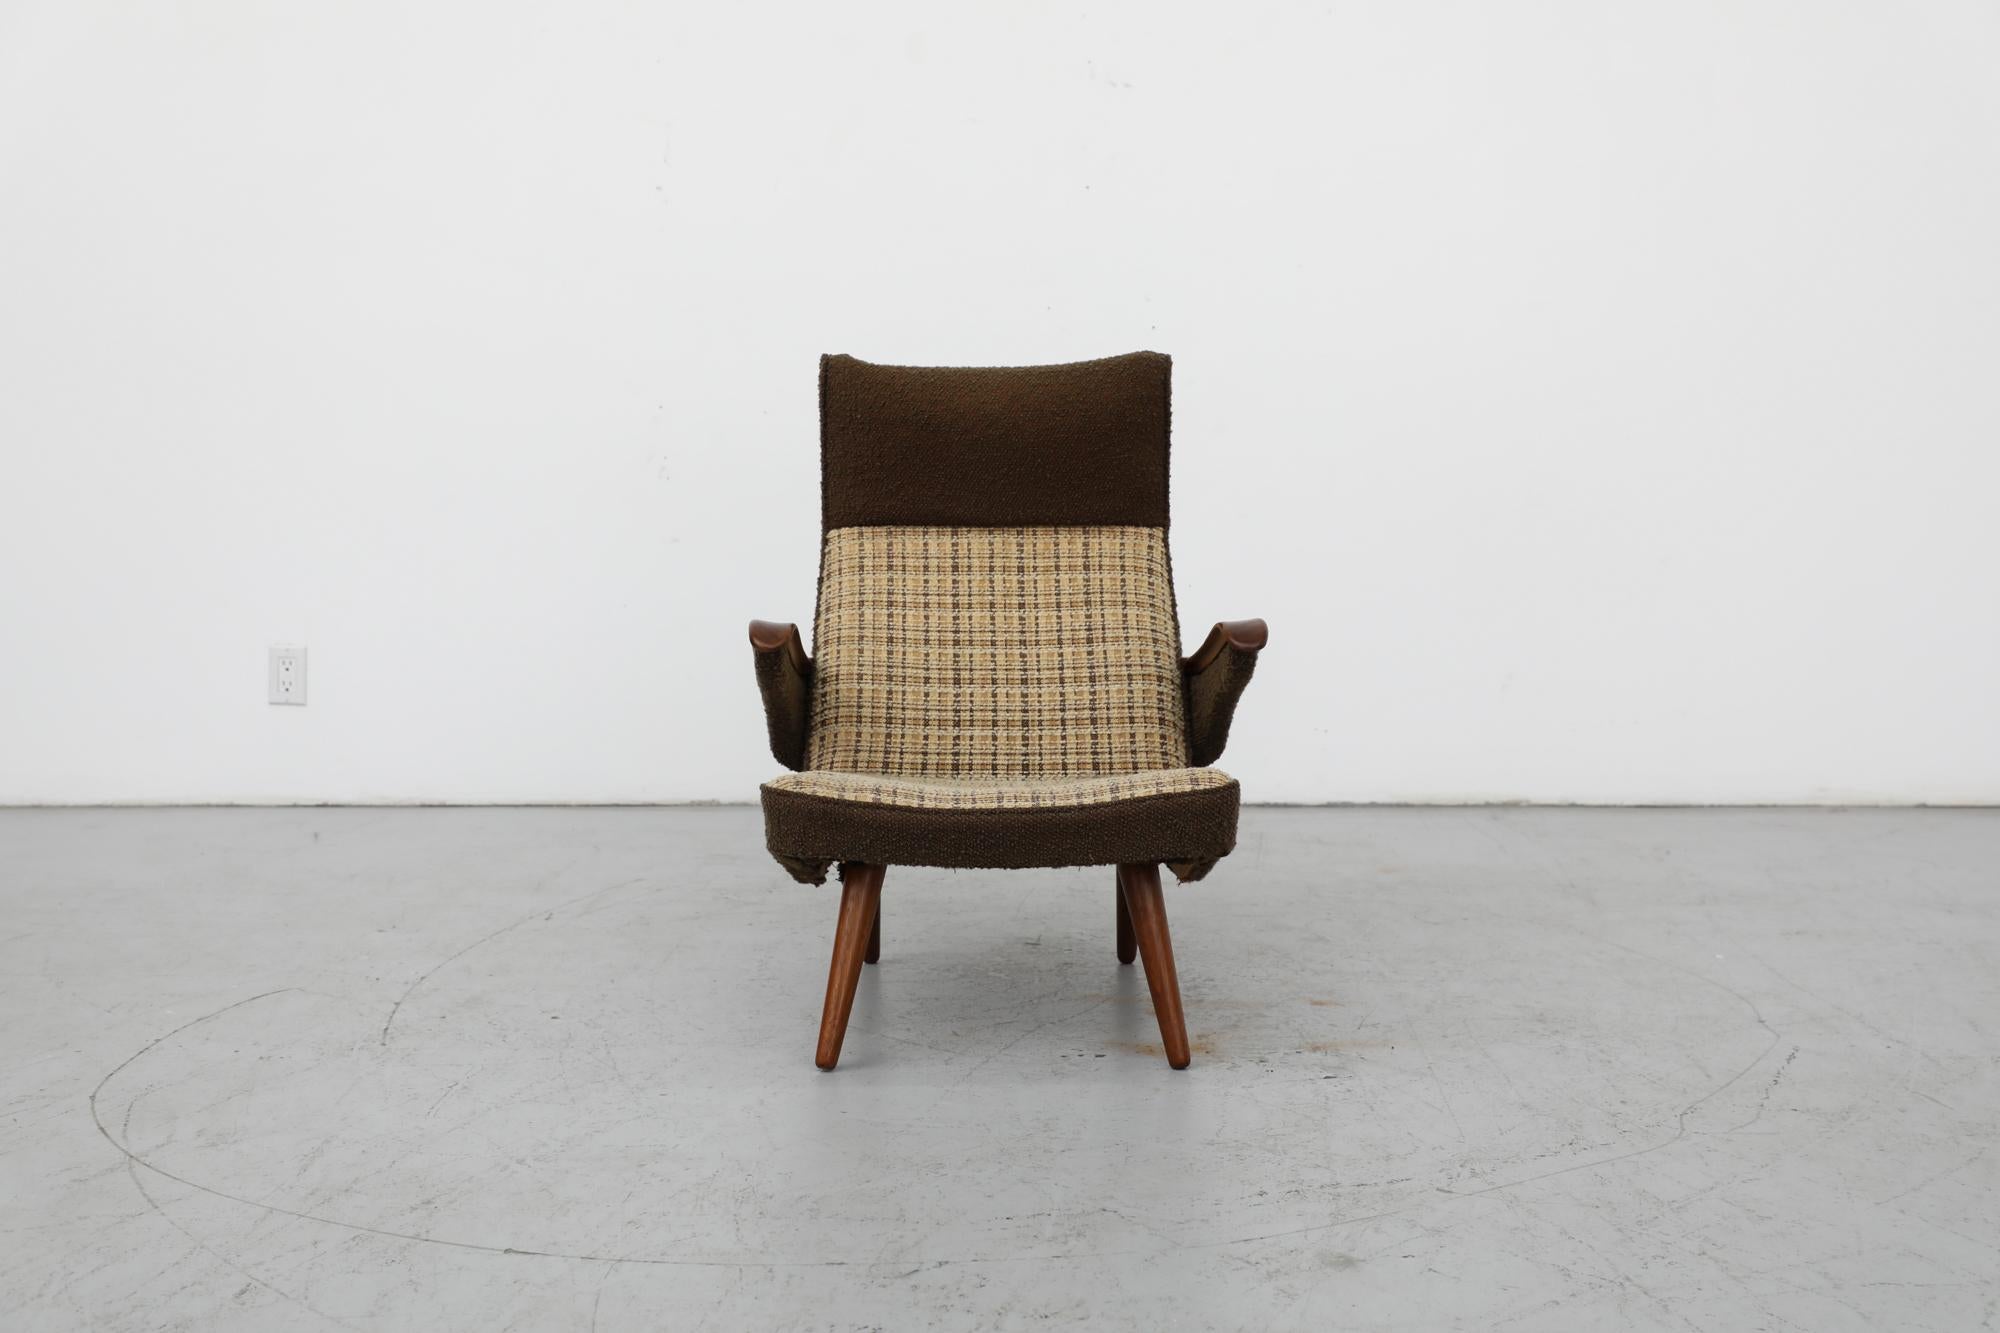 Mid-Century armchair with original green and plaid upholstery and beautifully carved teak armrests. This chair has a beautifully classic Scandinavian design with tapered legs, tilted headrest and slight curves. The armrests and legs have been